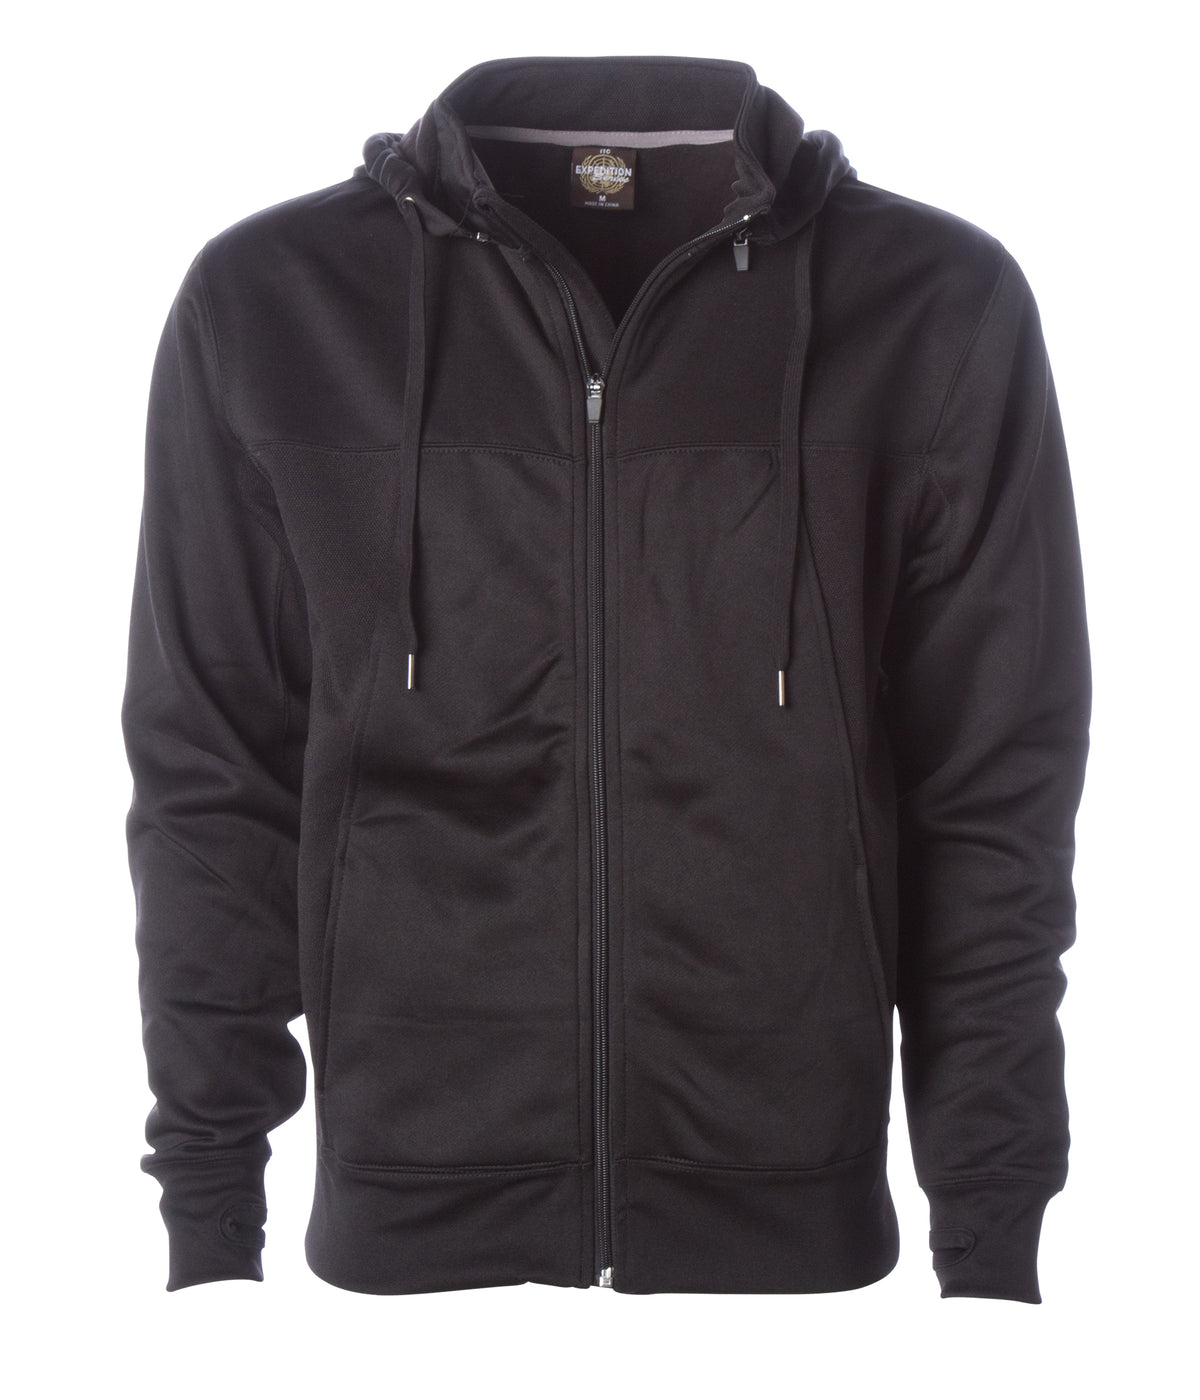 Collared Water Resistant Windbreaker Jacket | Independent Trading Company